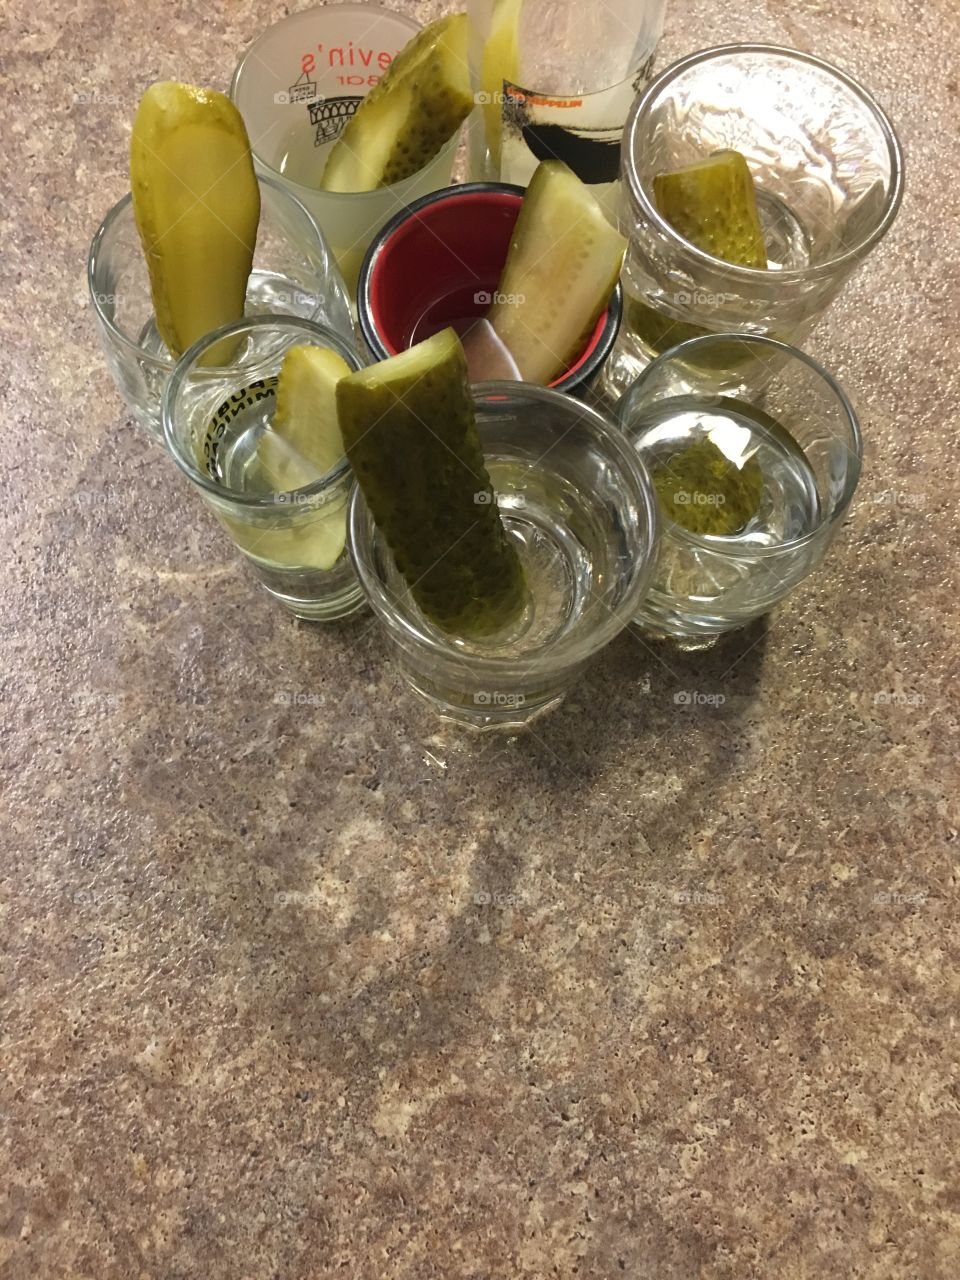 Pickle shooter